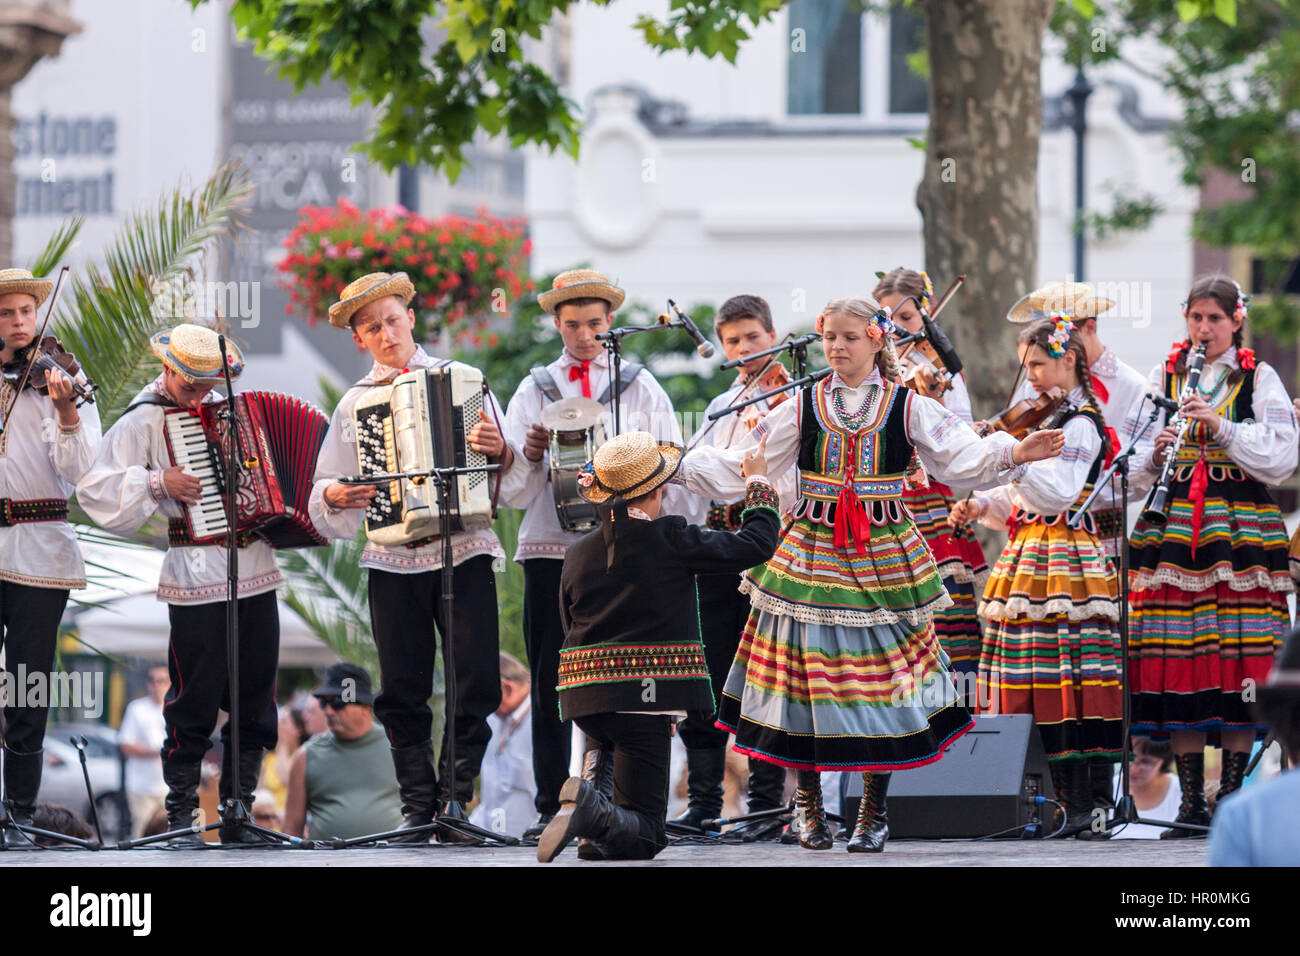 Boys and girls in folk costume performing a Hungarian folk dance in Budapest, Hungary Stock Photo